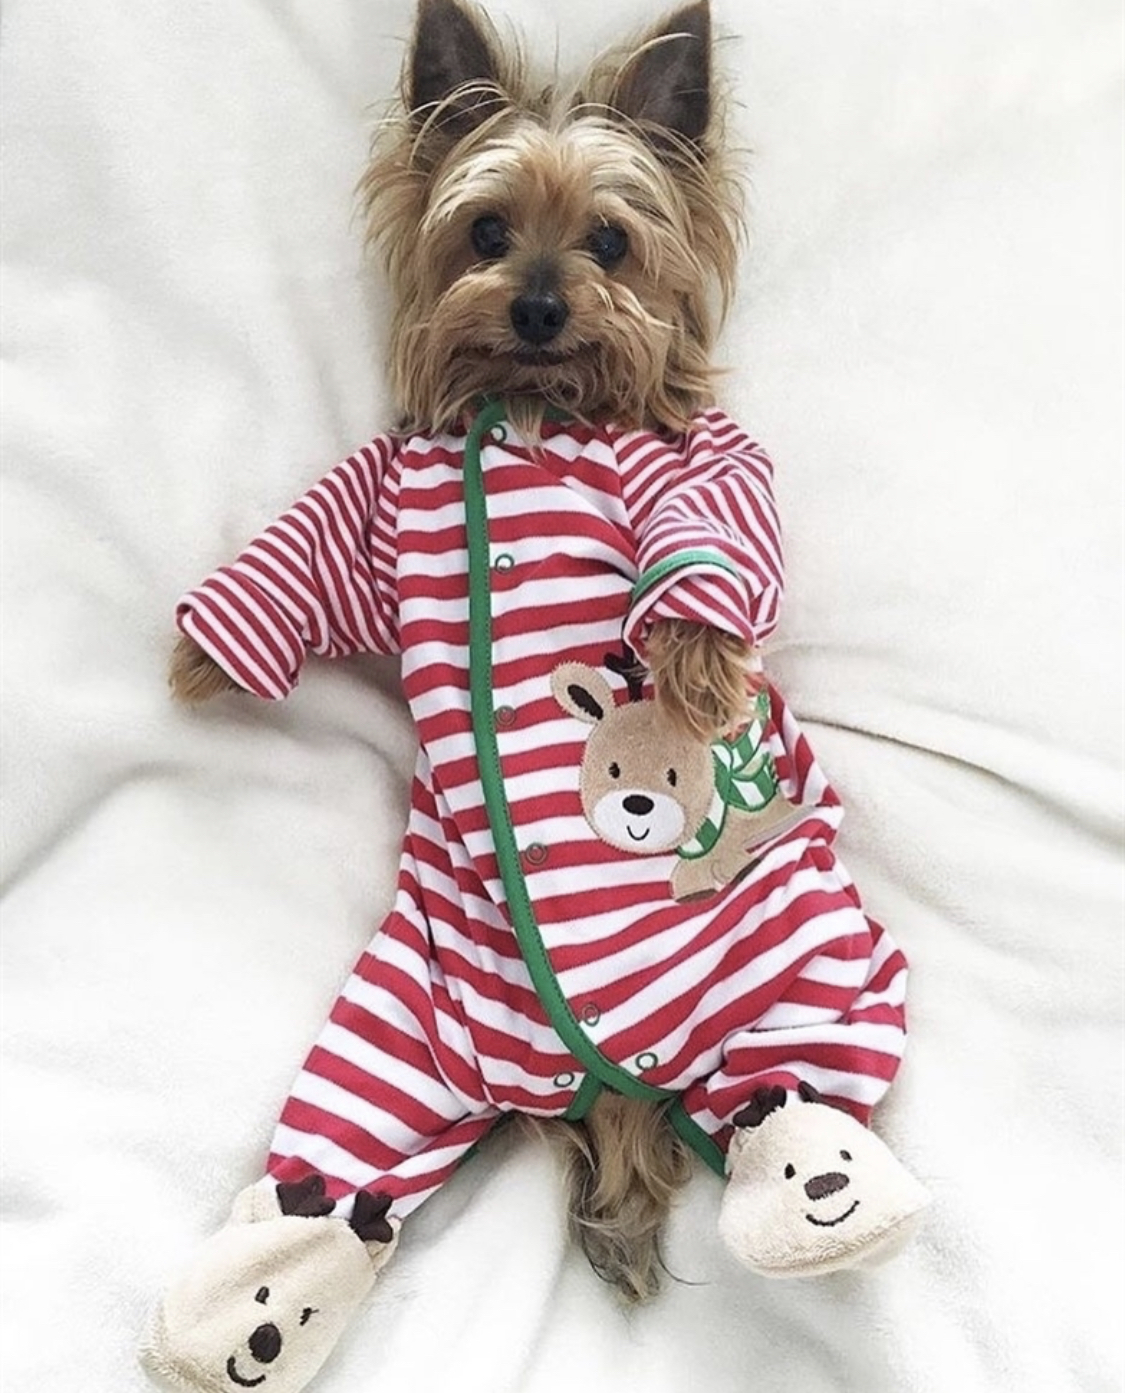 Yorkshire Terrier lying on the bed wearing a striped jumpsuit